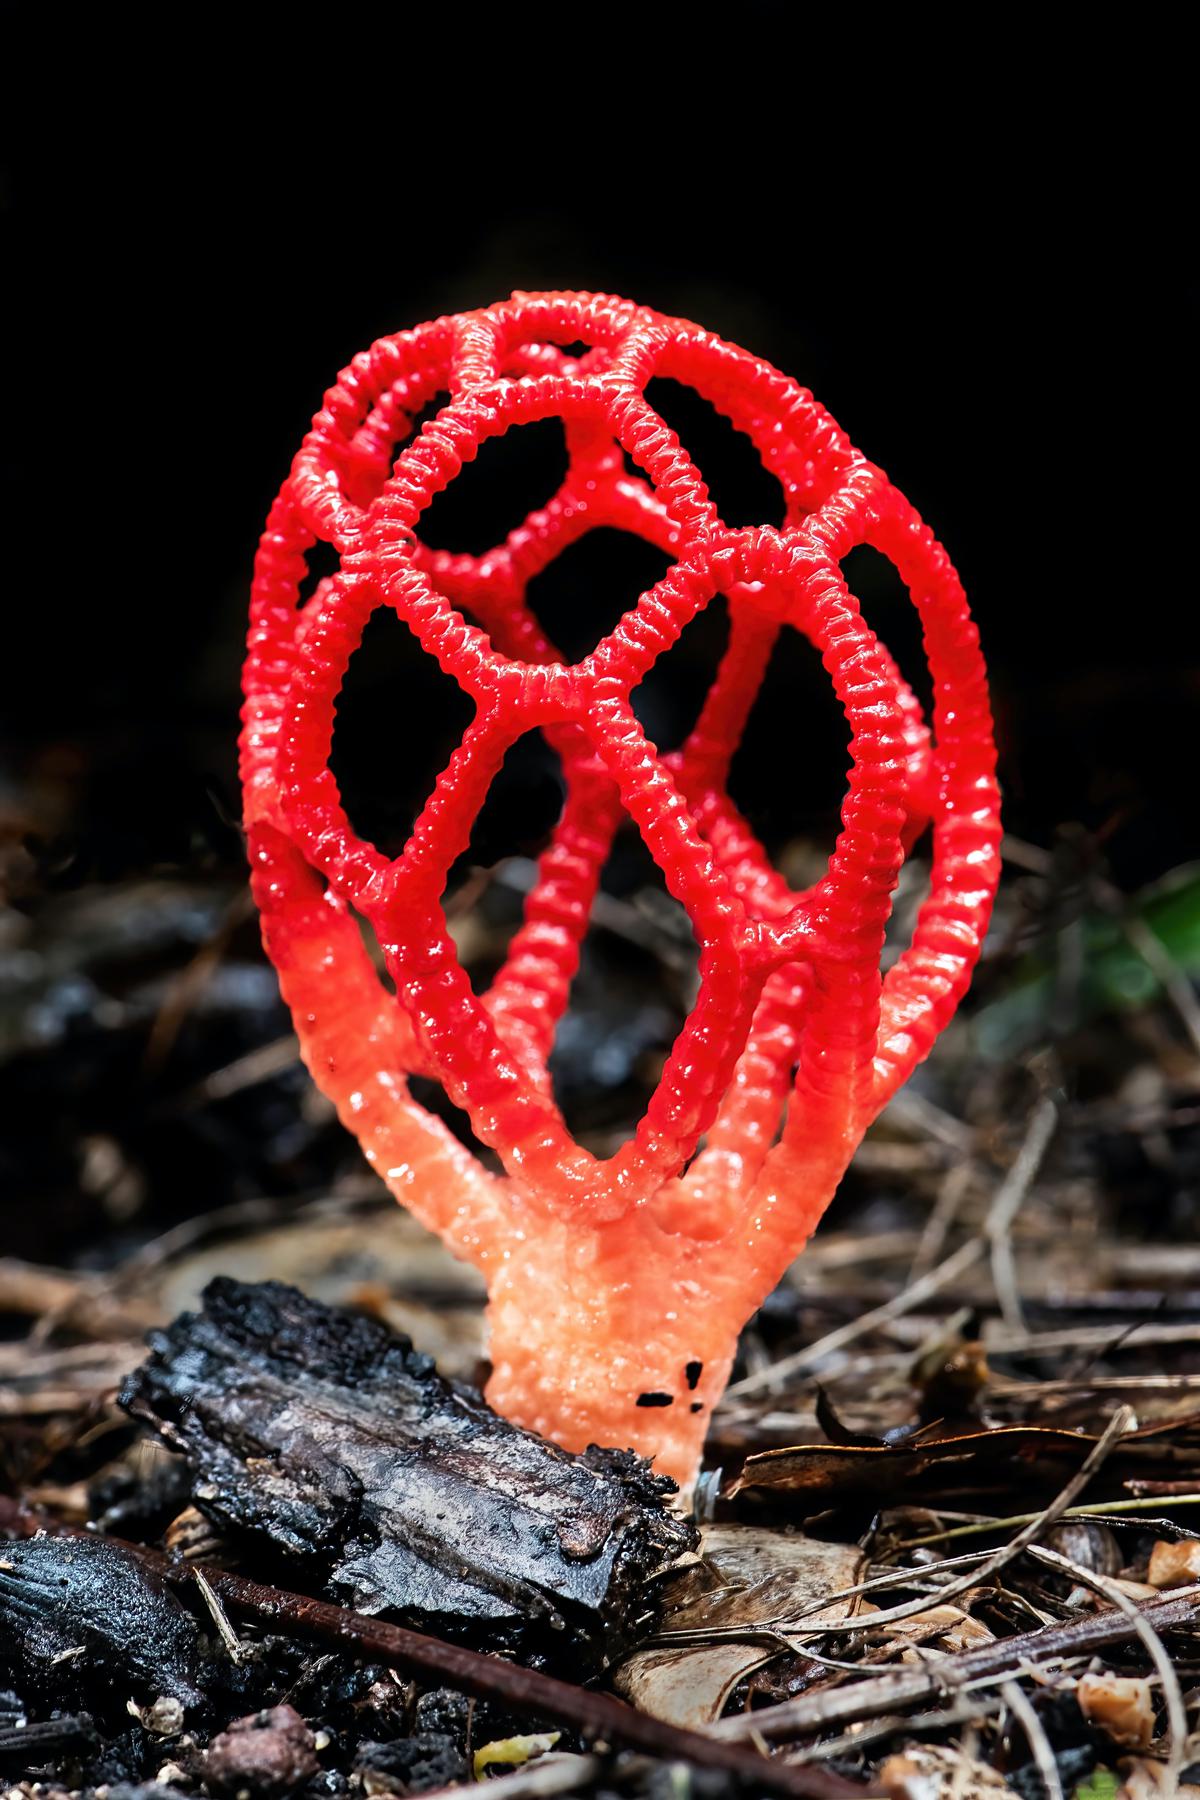 Image illustrating the appearance of stinkhorn fungus in its different stages of development, from the egg-like structure to the mature fruiting body.